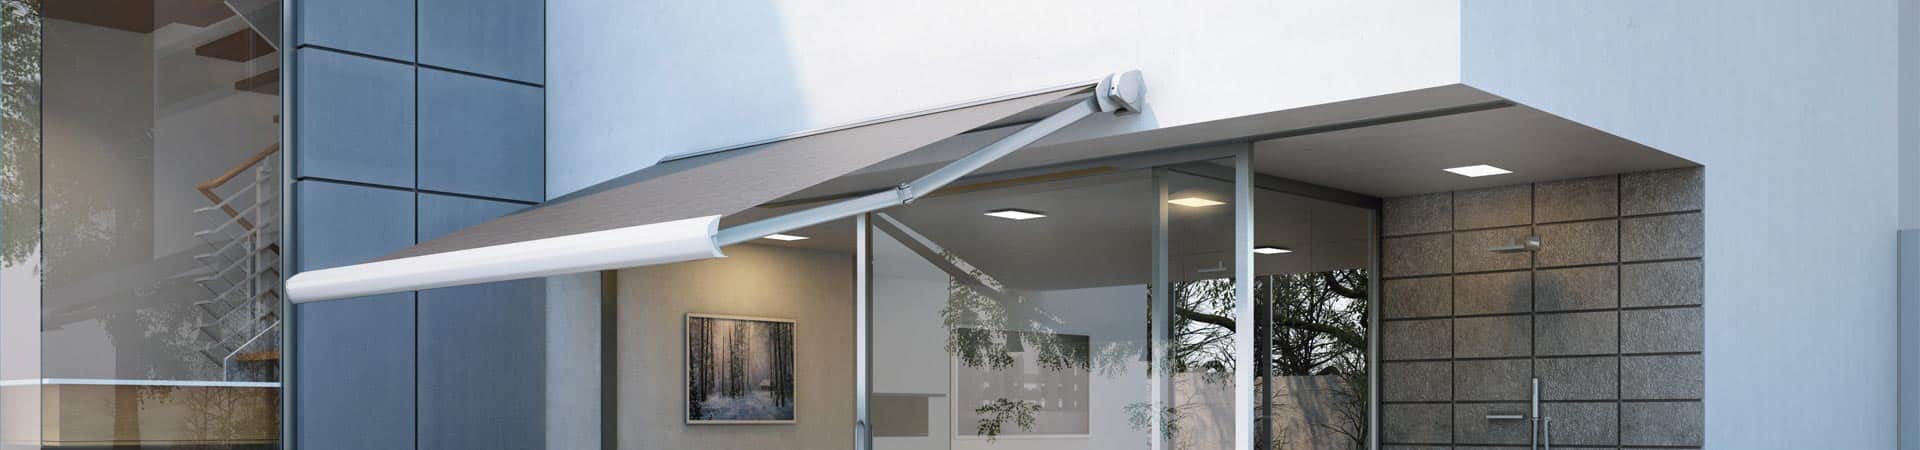 Retractable Awnings Slider